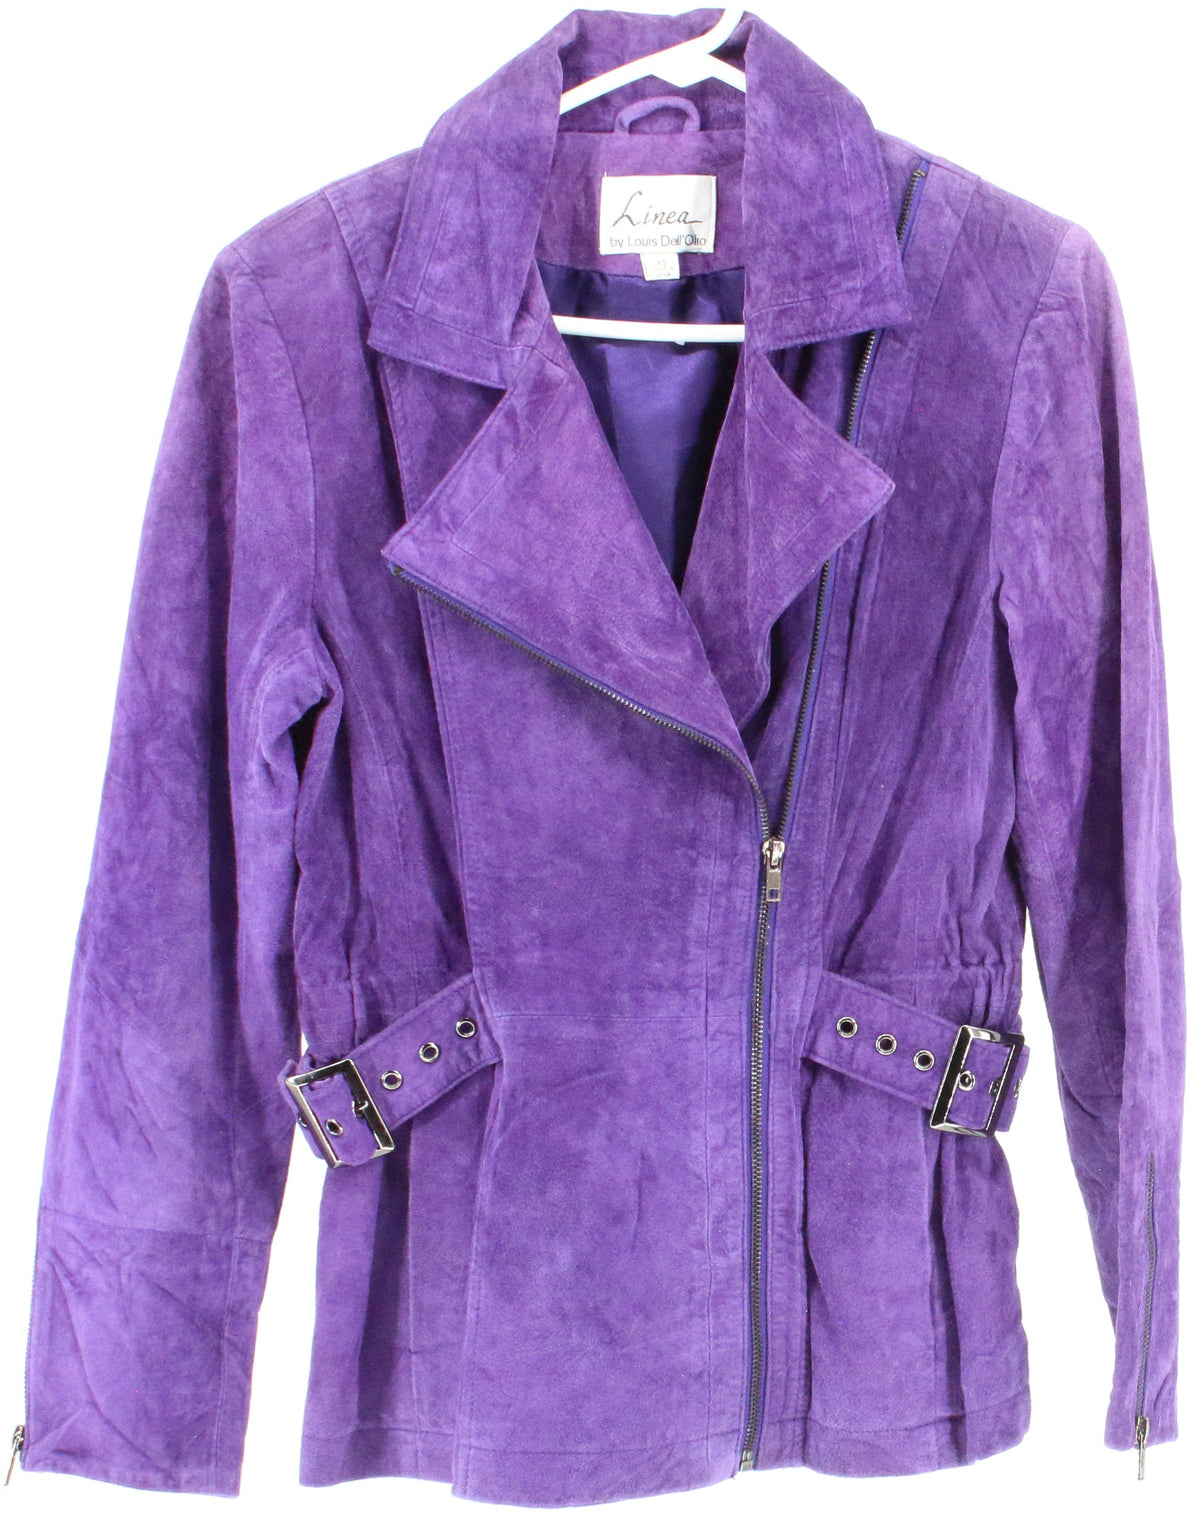 Linea by Louis Dell'Olio Purple Leather Jacket